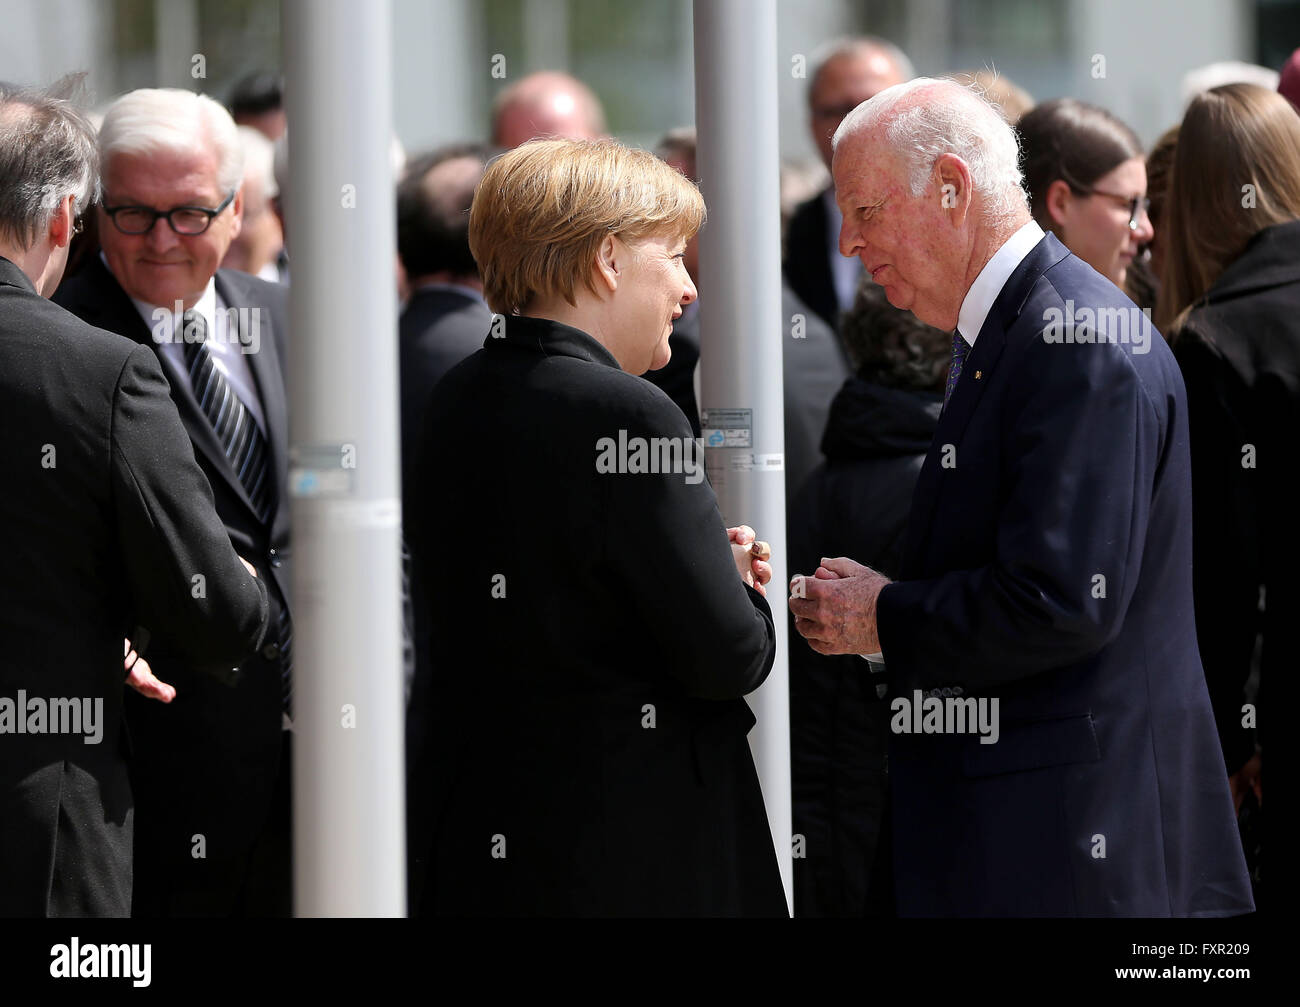 Bonn, Germany. 17th Apr, 2016. German Chancellor Angela Merkel (C) talks to former US Secretary of State James Baker (R), with German foreign minister Frank-Walter Steinmeier (2-L) pictured behind them, following an Act of State held for former German foreign minister Hans-Dietrich Genscher in the former plenary hall of the German Bundestag parliament in Bonn, Germany, 17 April 2016. Photo: OLIVER BERG/dpa/Alamy Live News Stock Photo